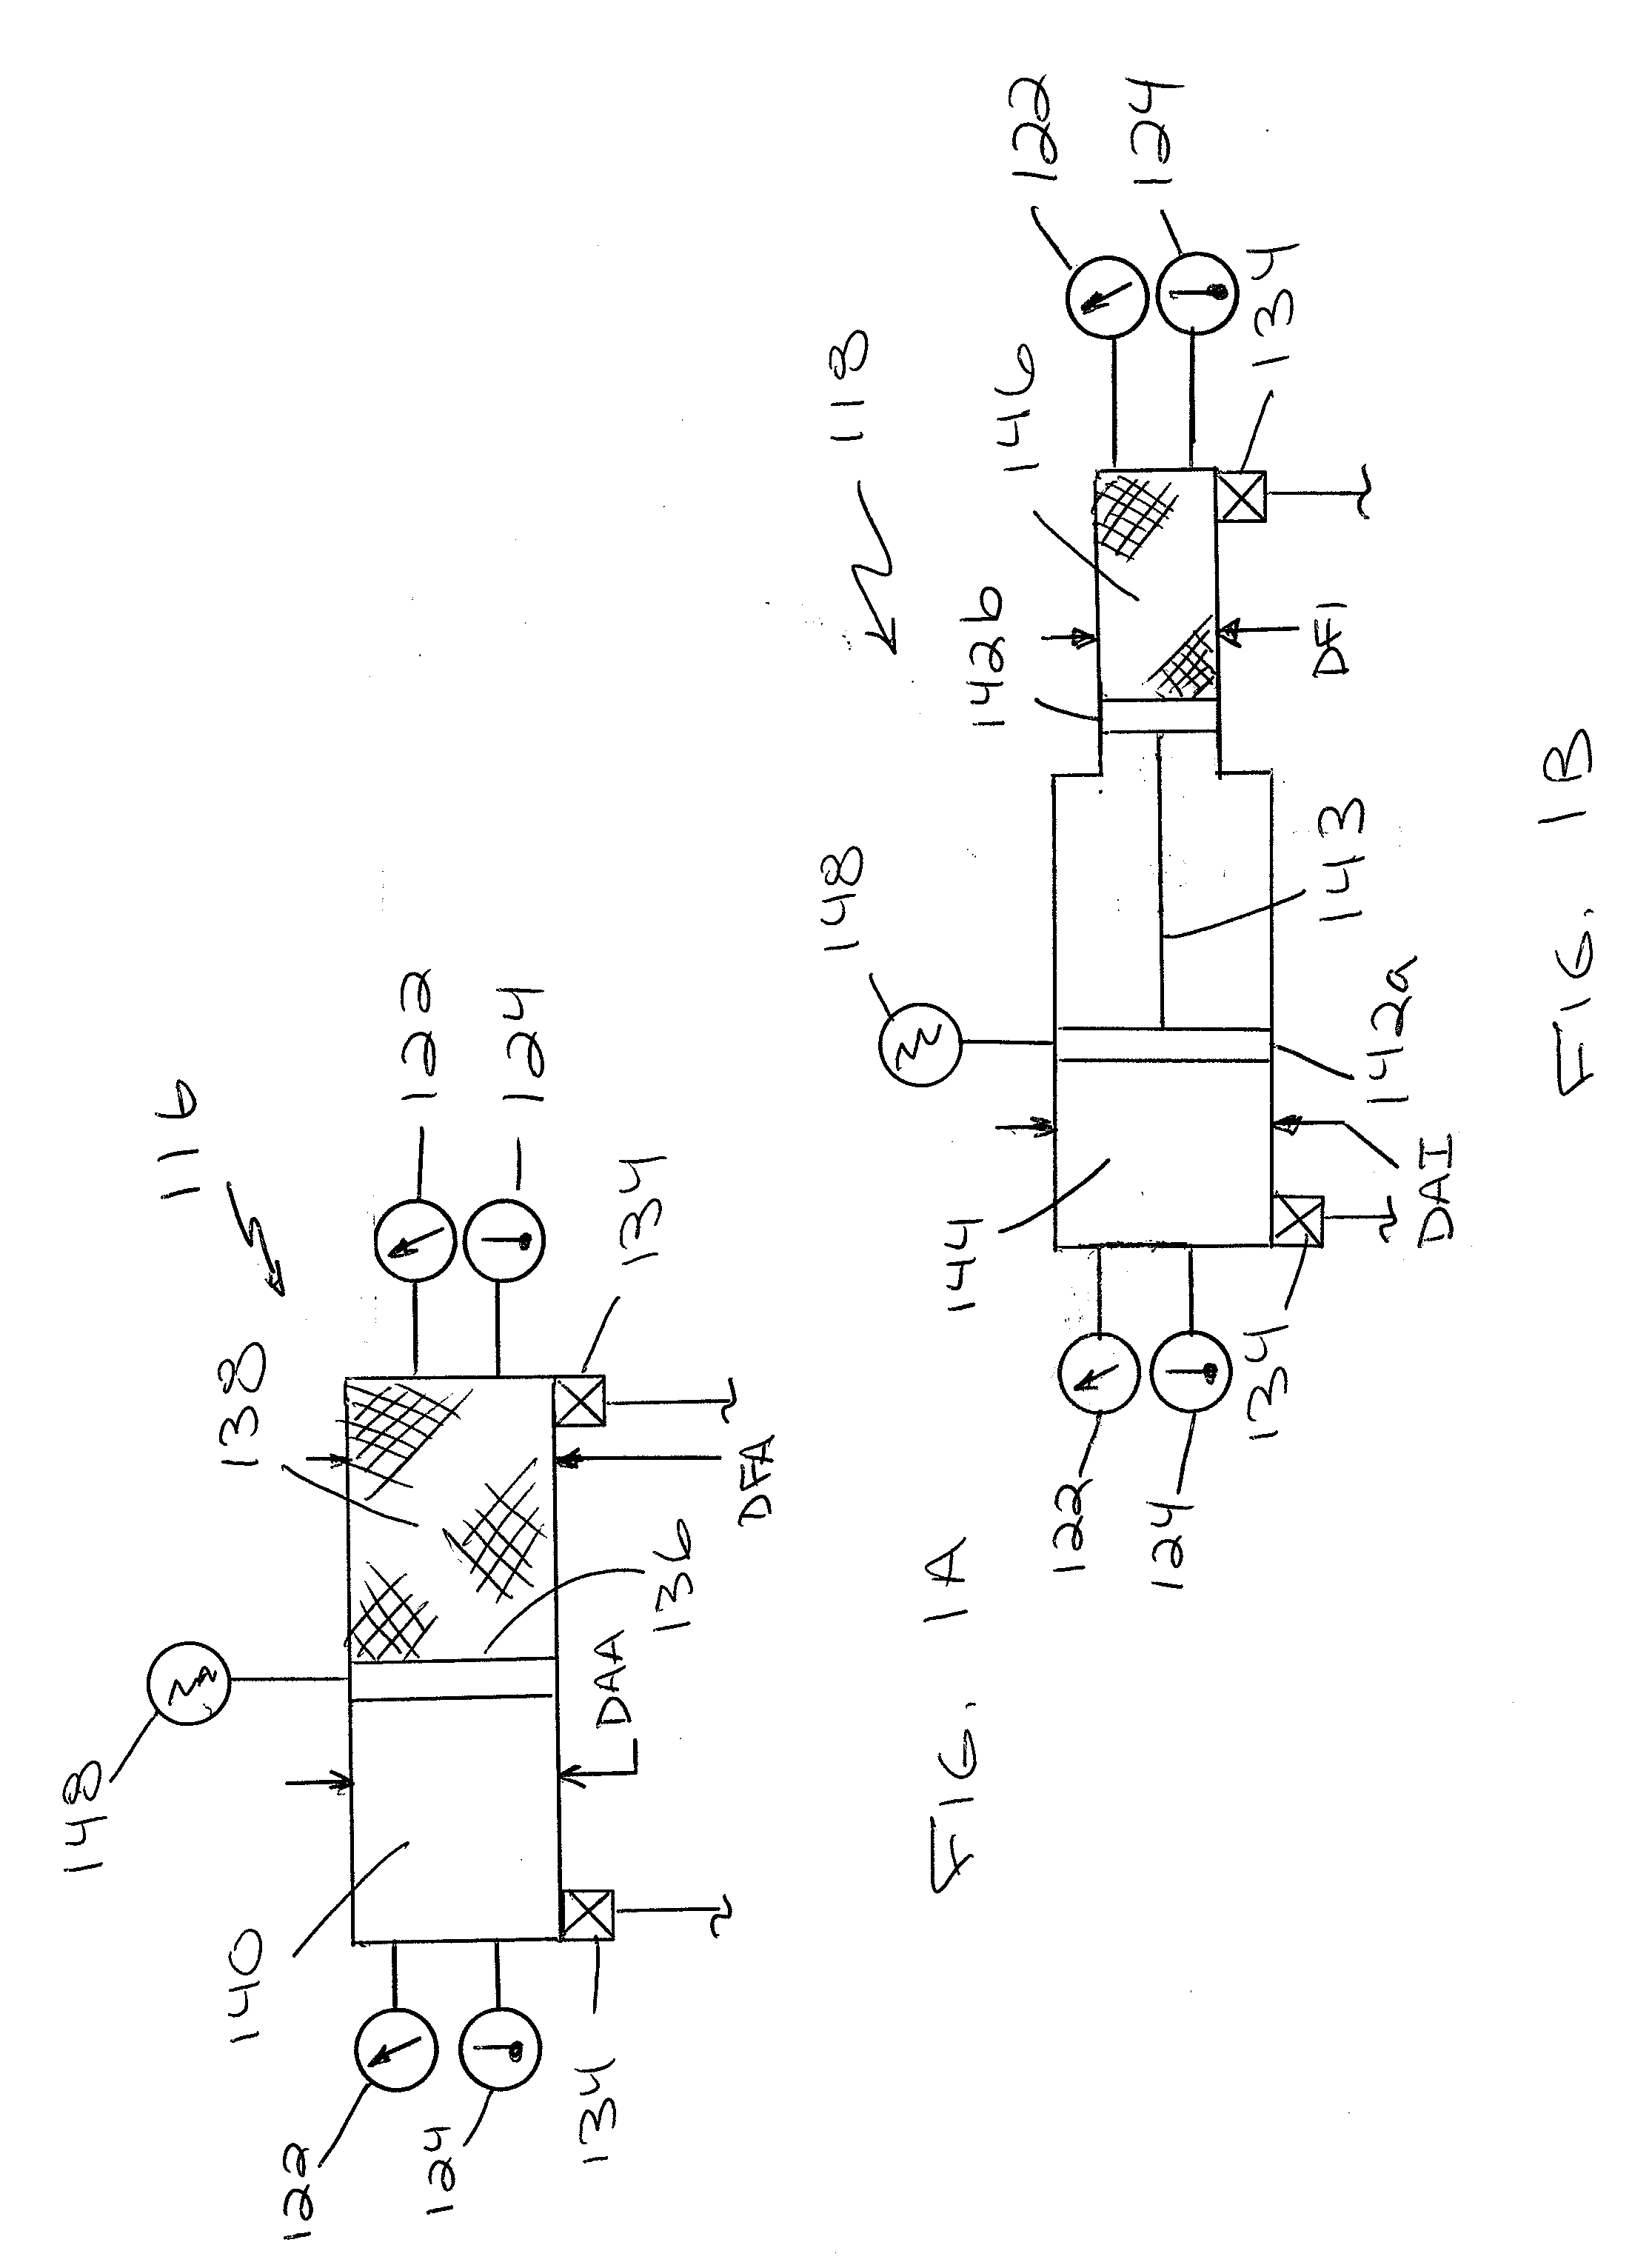 Systems and Methods for Energy Storage and Recovery Using Compressed Gas